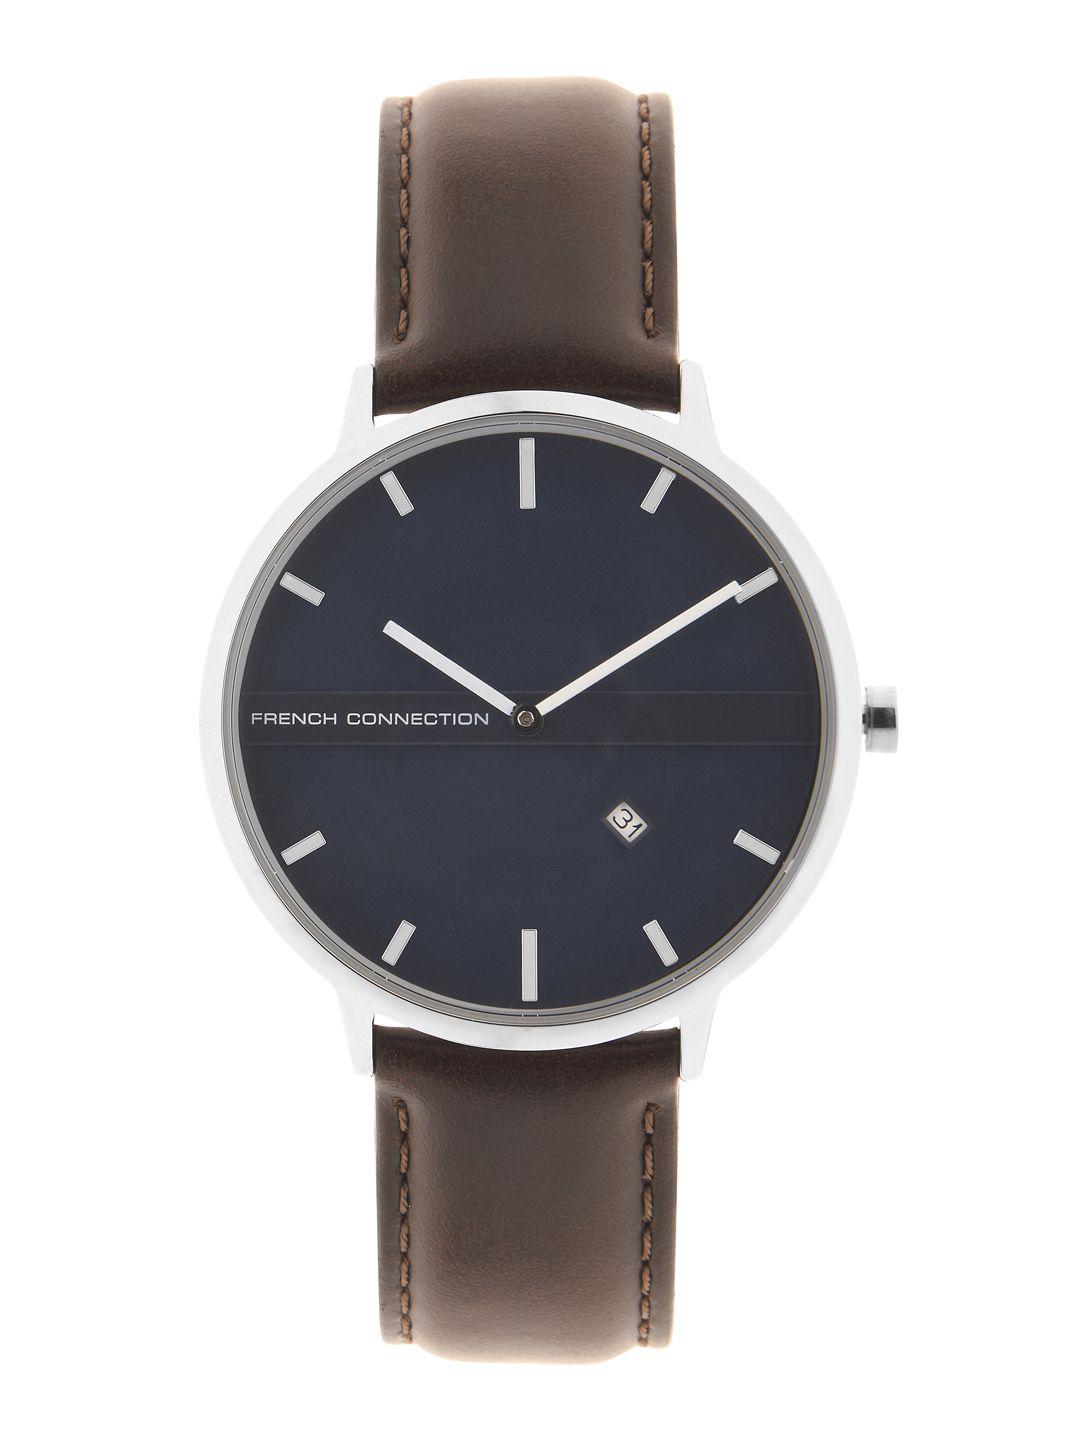 french-connection-men-navy-blue-analogue-watch-fcm0001a